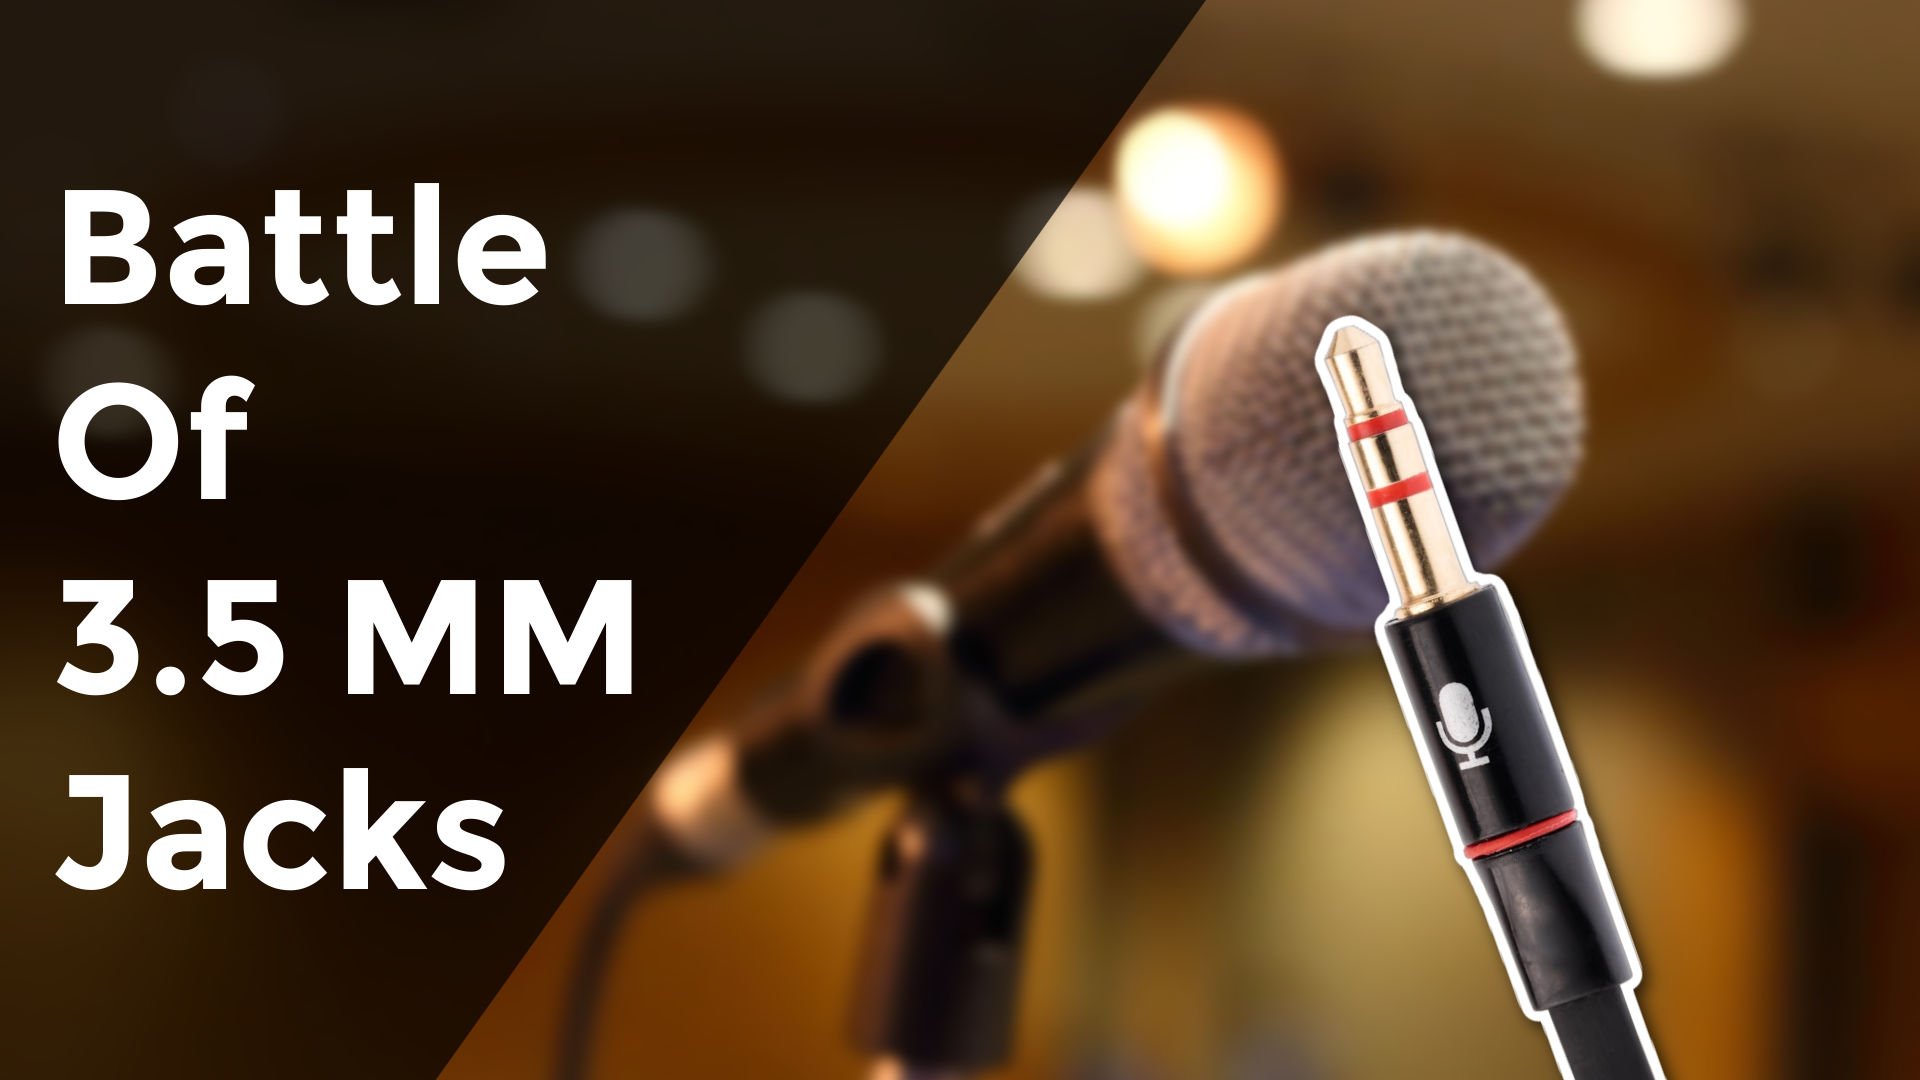 Microphone for ASMR: Guide to find the best one